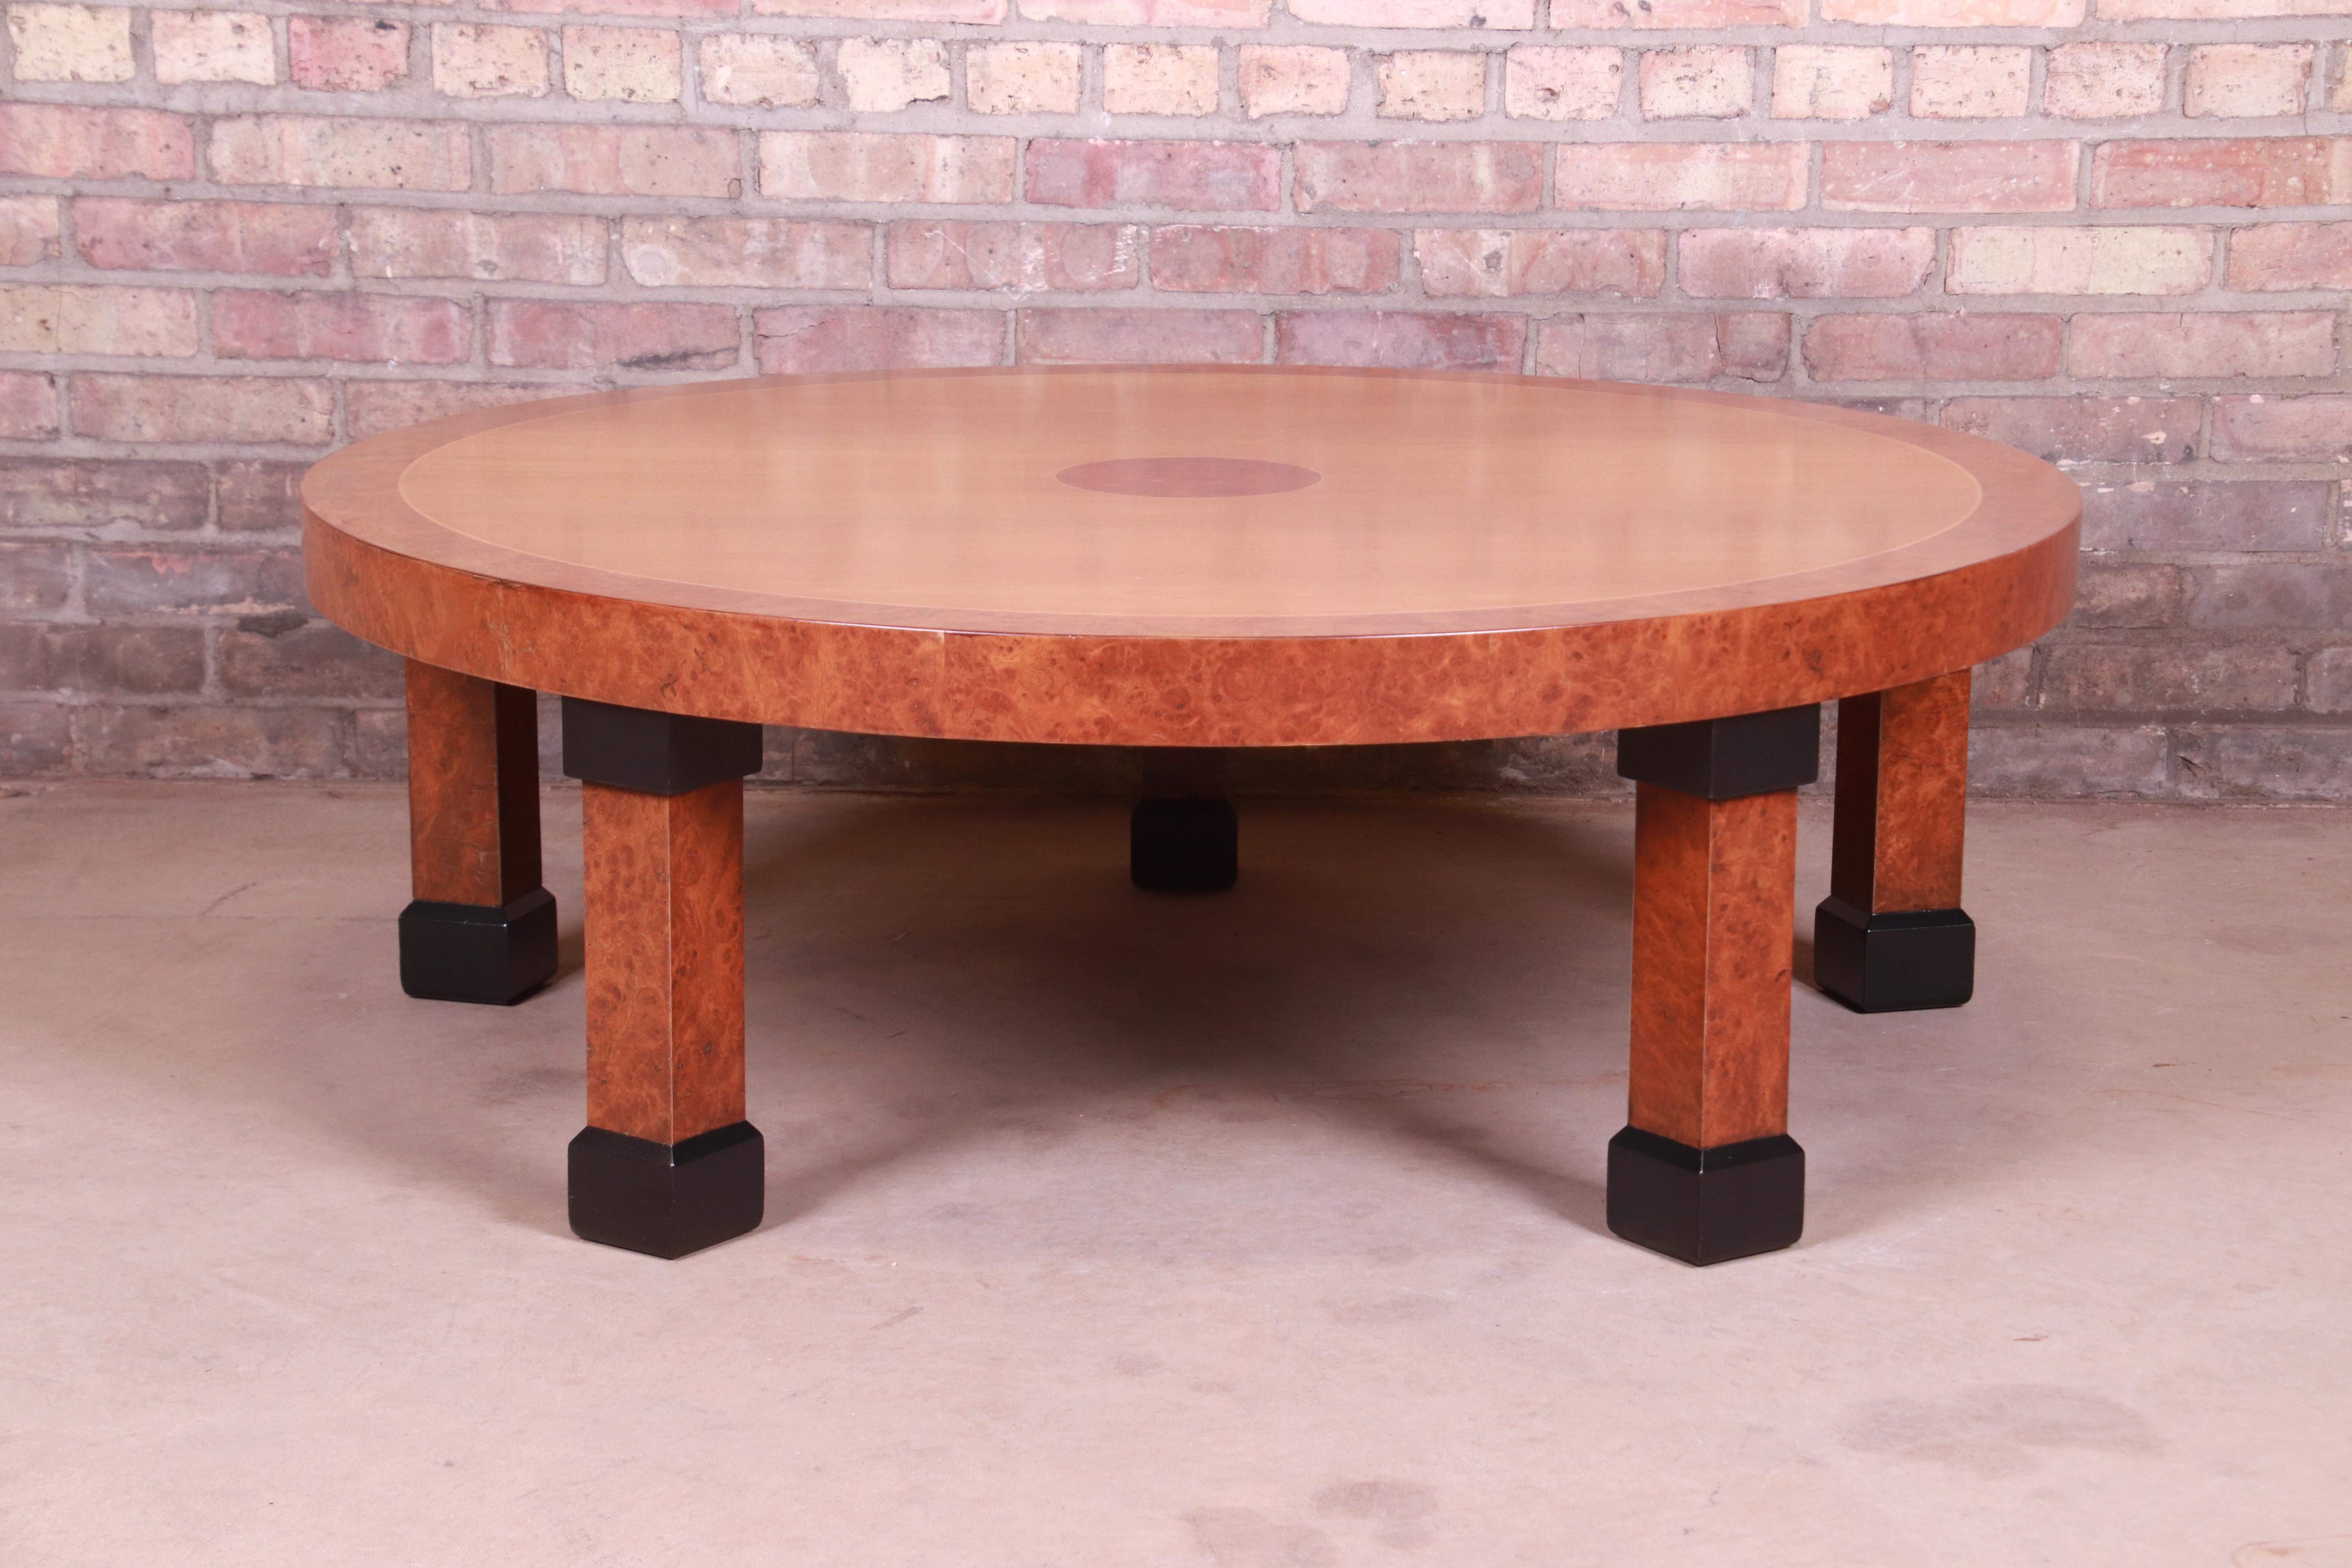 A gorgeous French Empire style coffee or cocktail table

By Baker Furniture

USA, Late 20th century

Cherry wood top, with burled walnut banding and legs and ebonized feet and accents.

Measures: 45